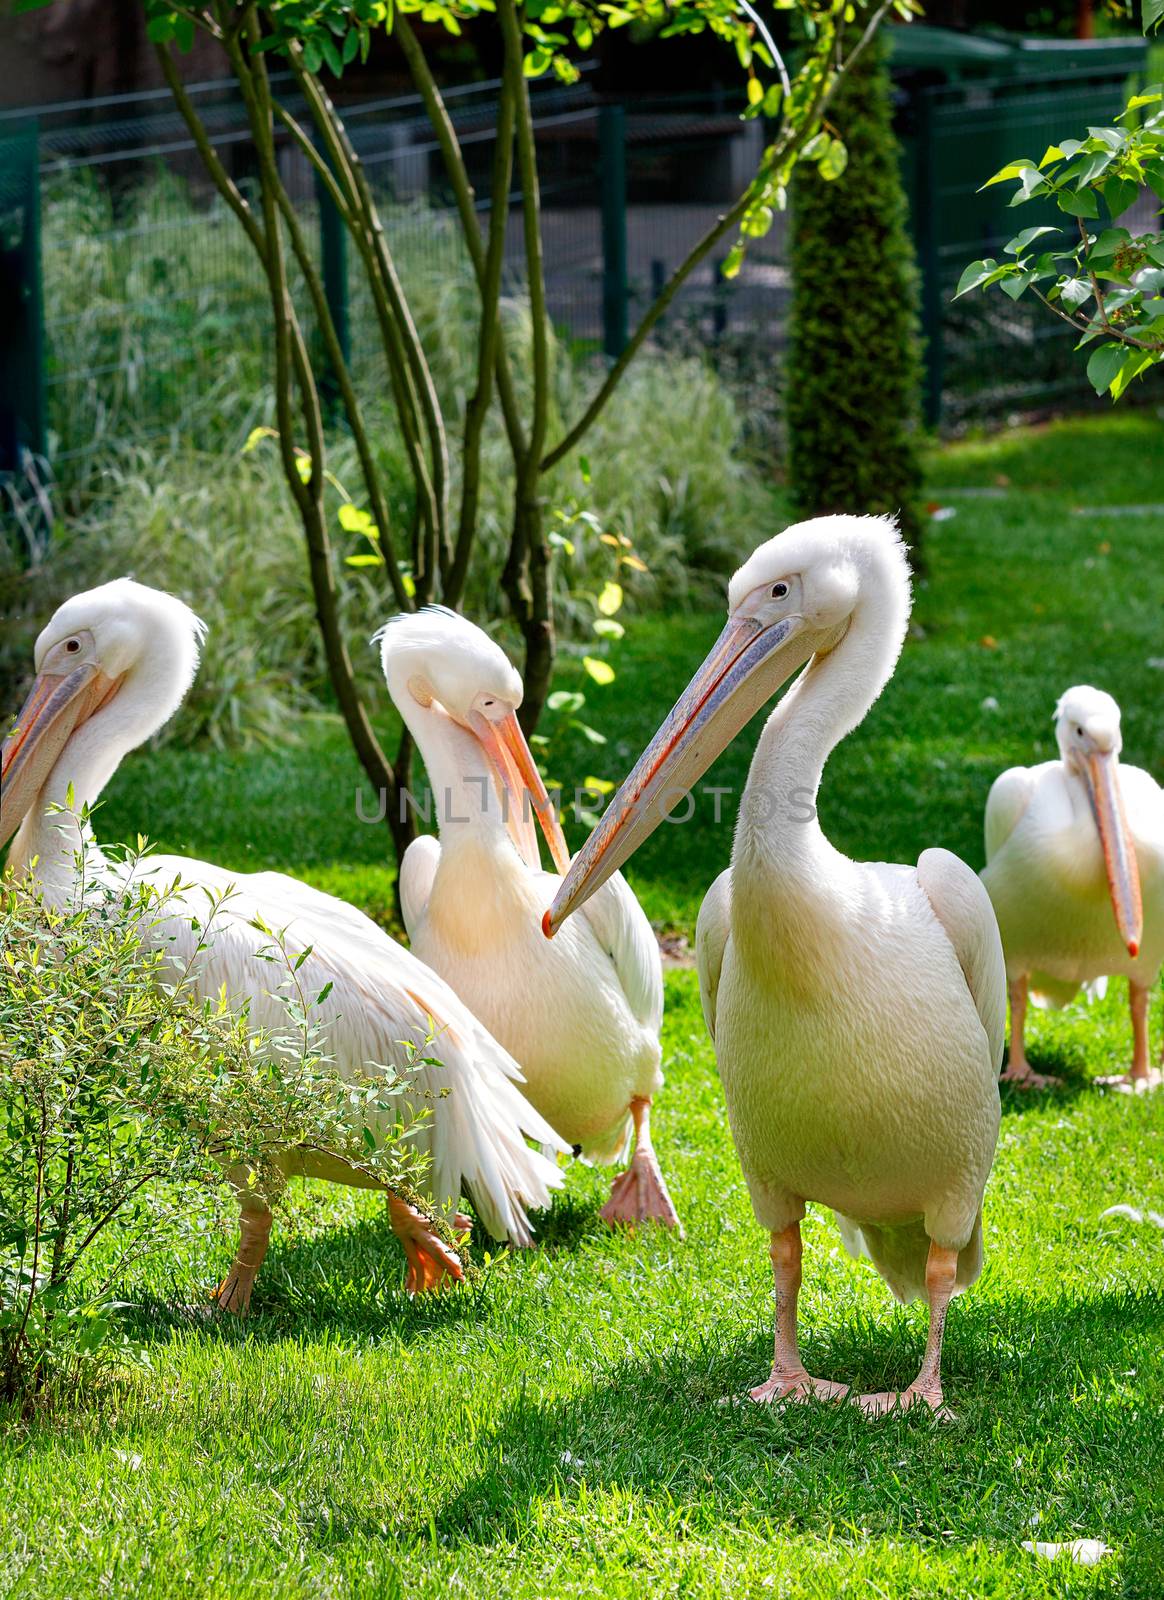 A flock of great white pelicans are resting on a green lawn under soft sunlight, vertical image, selective focus.